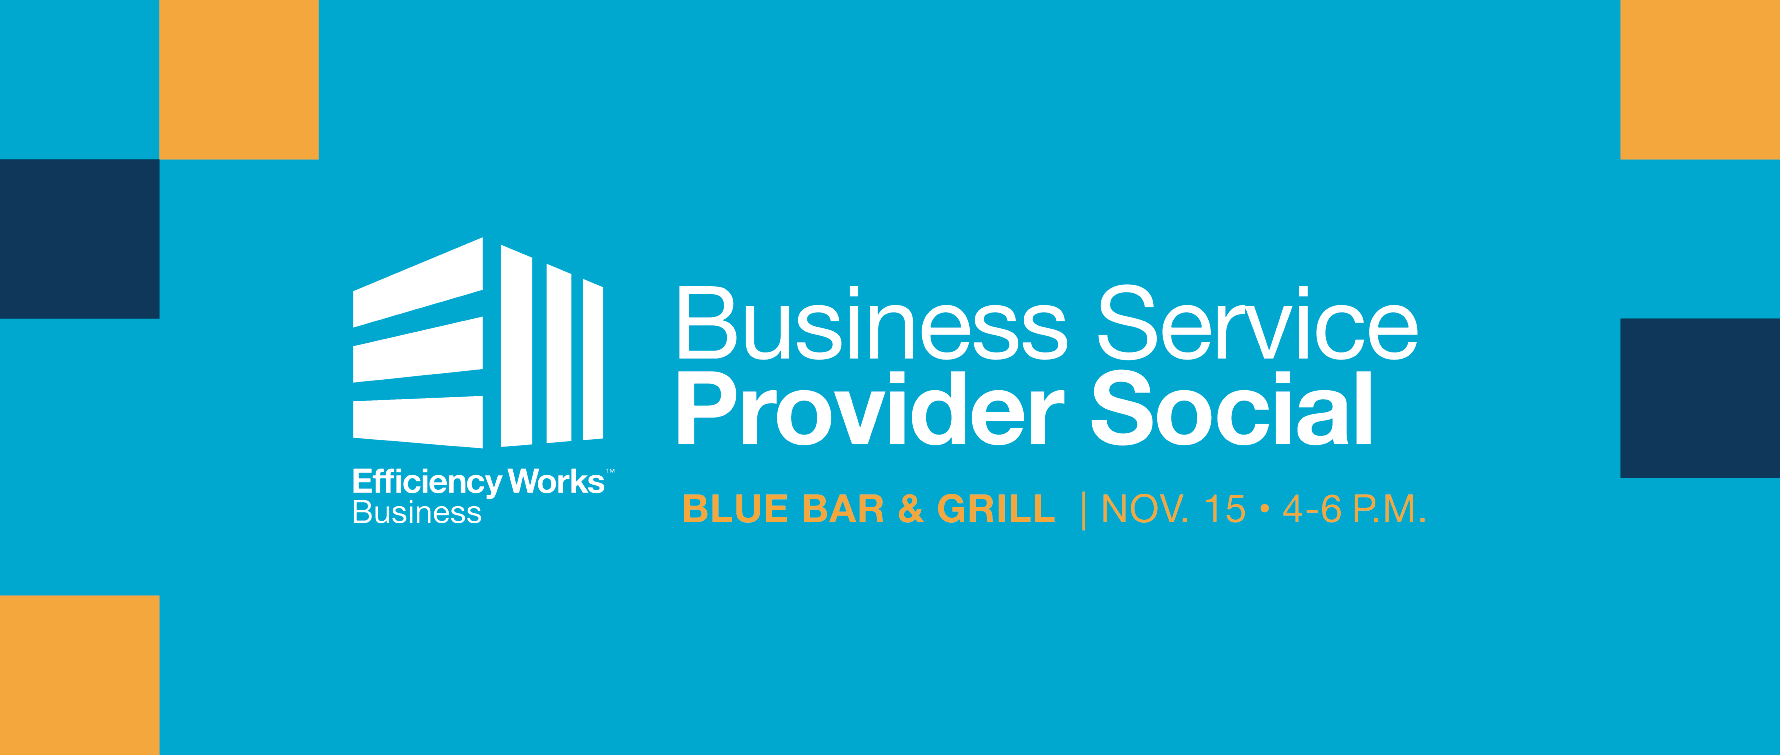 Efficiency Works Business Service Provider Social